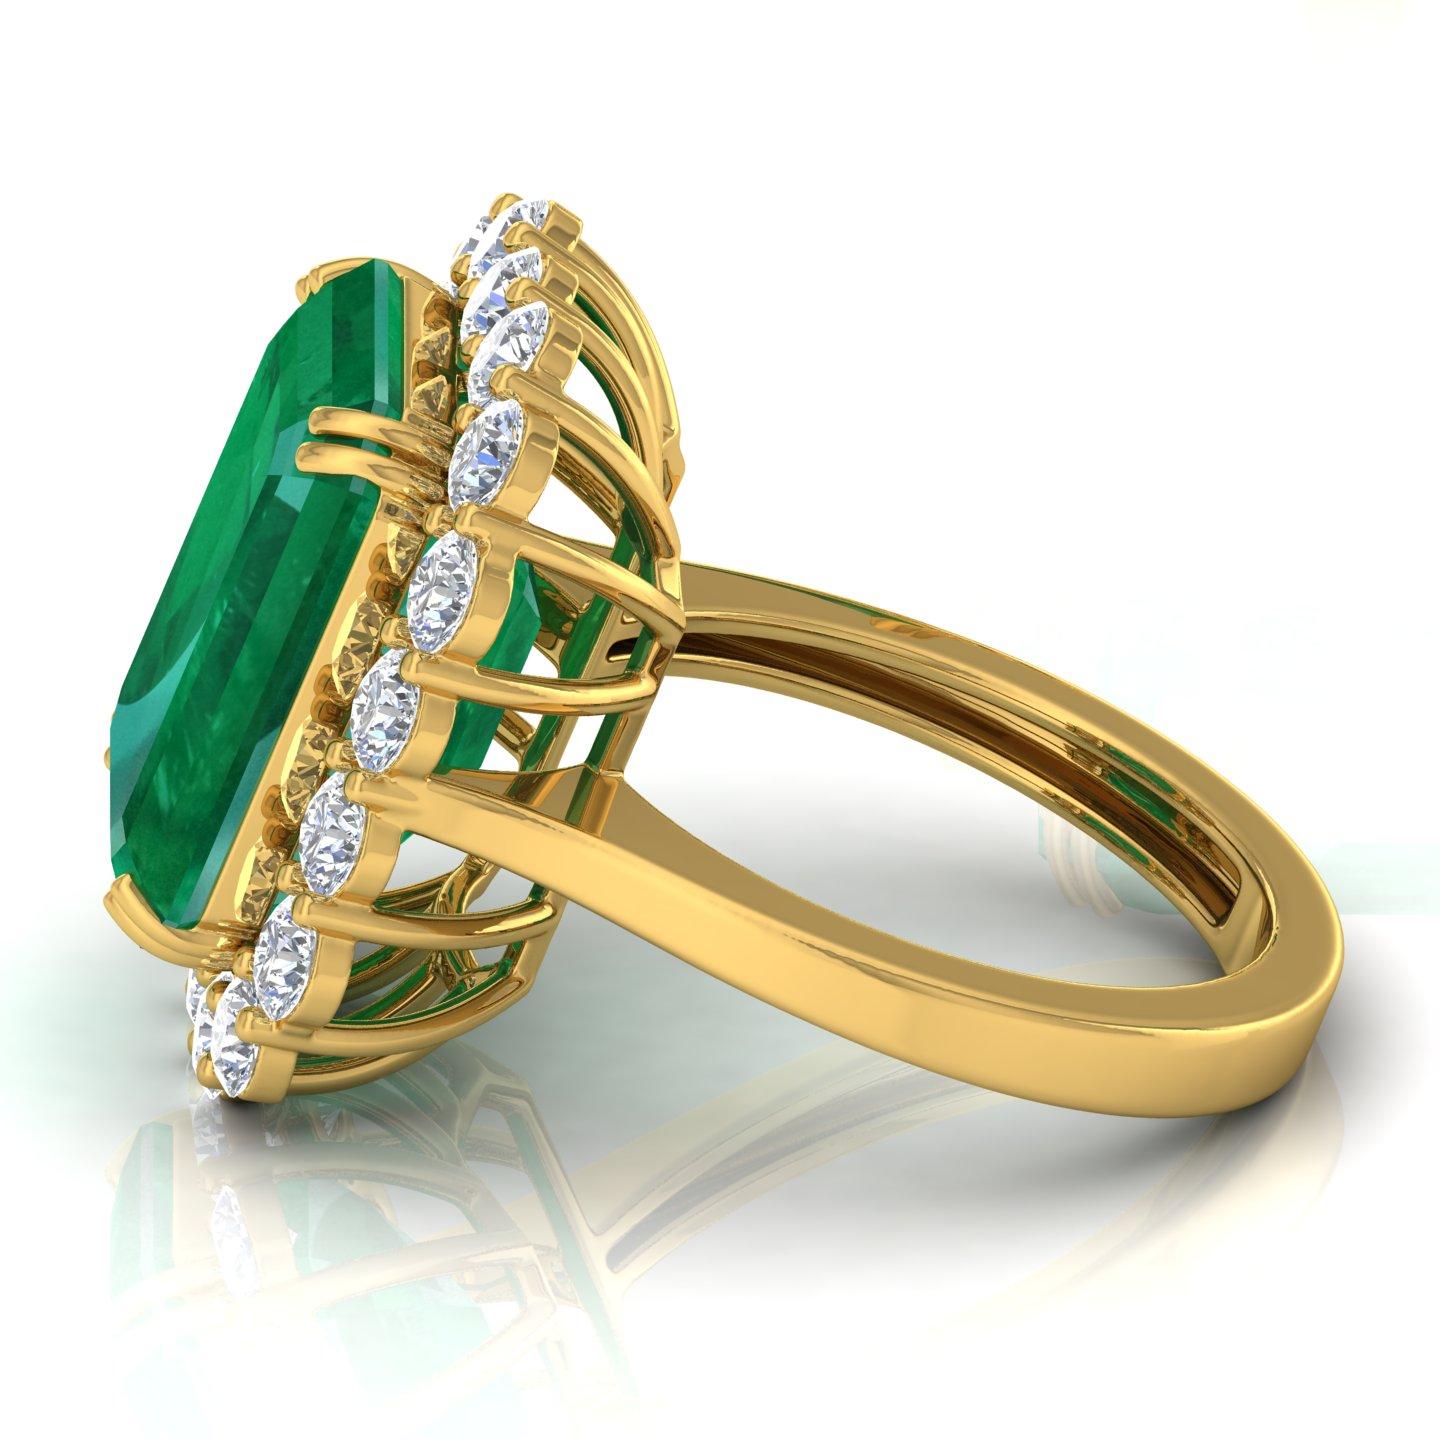 For Sale:  Zambian Emerald Cocktail Ring SI Clarity HI Color Diamond 18 Karat Yellow Gold 2